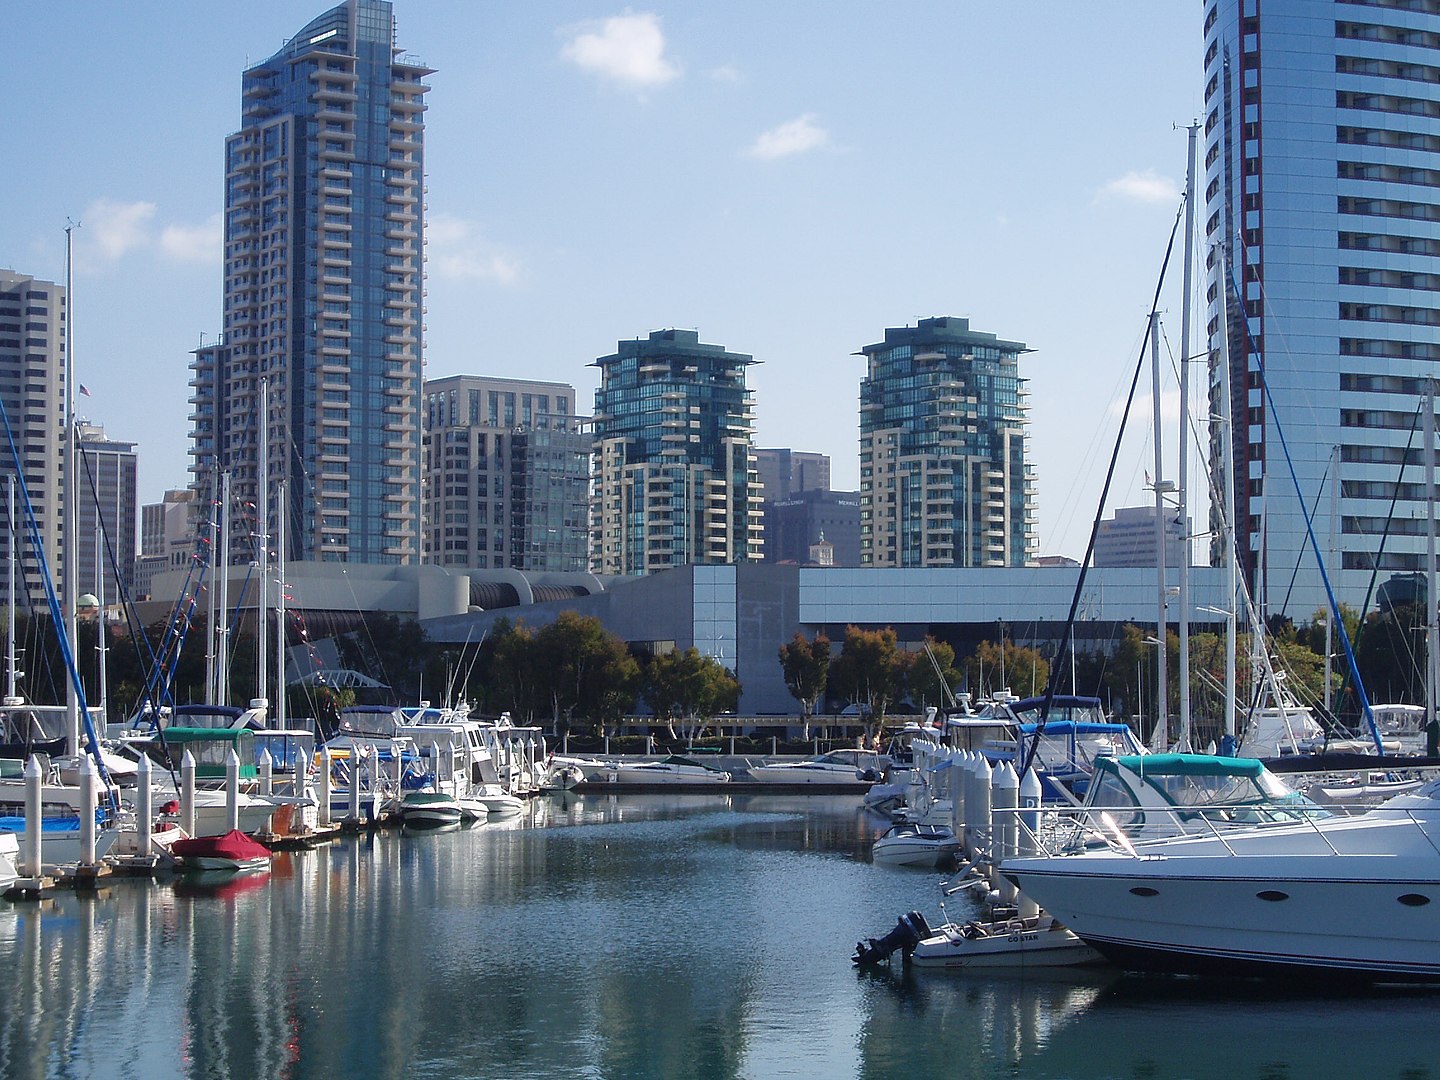 View of the Marina district along the San Diego Bay in Downtown San Diego.